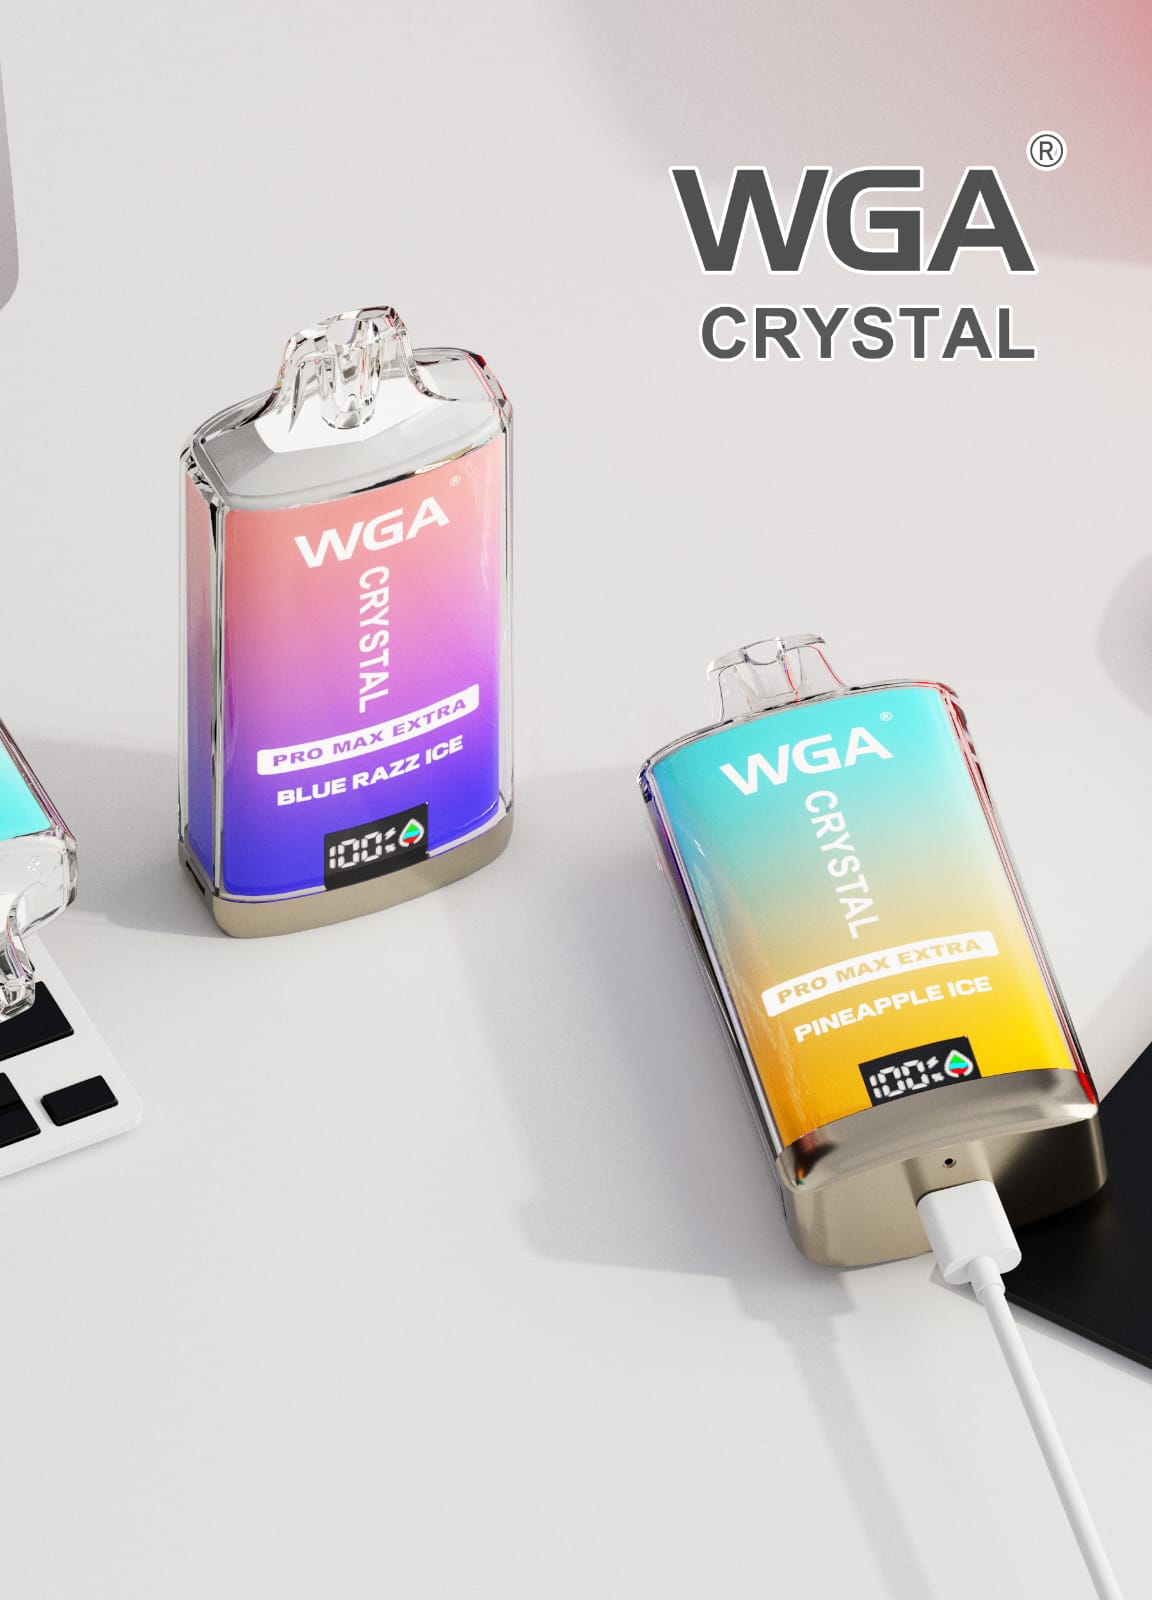 WGA The Crystal Pro Max Extra 15k Puffs Disposable Vape Device